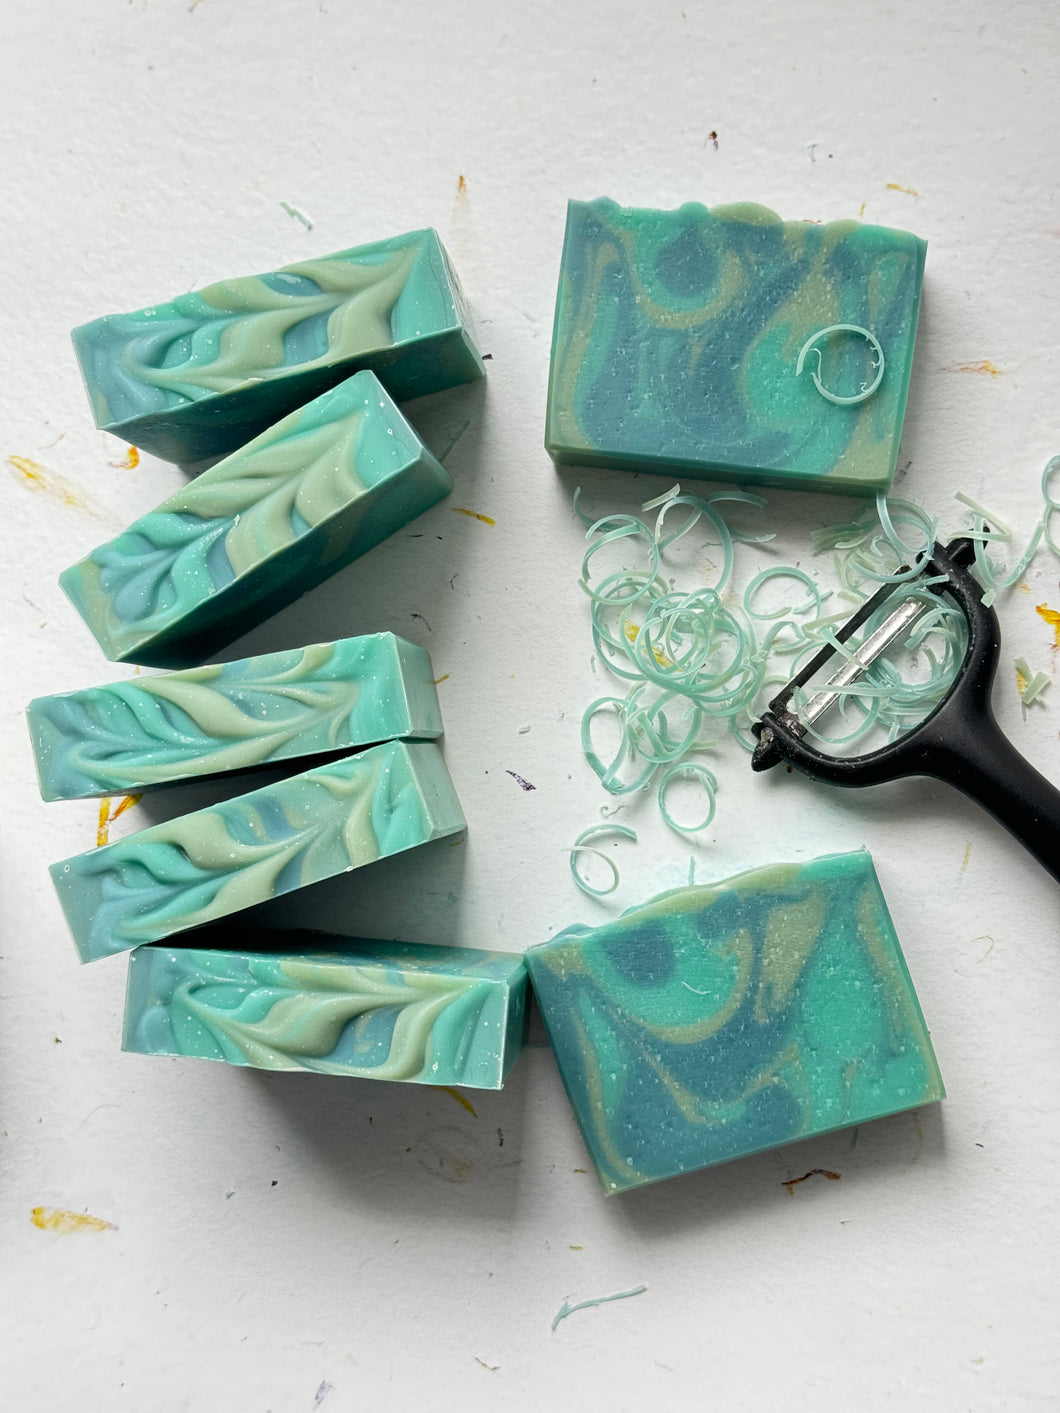 MATCHA HANDCRAFTED SOAP